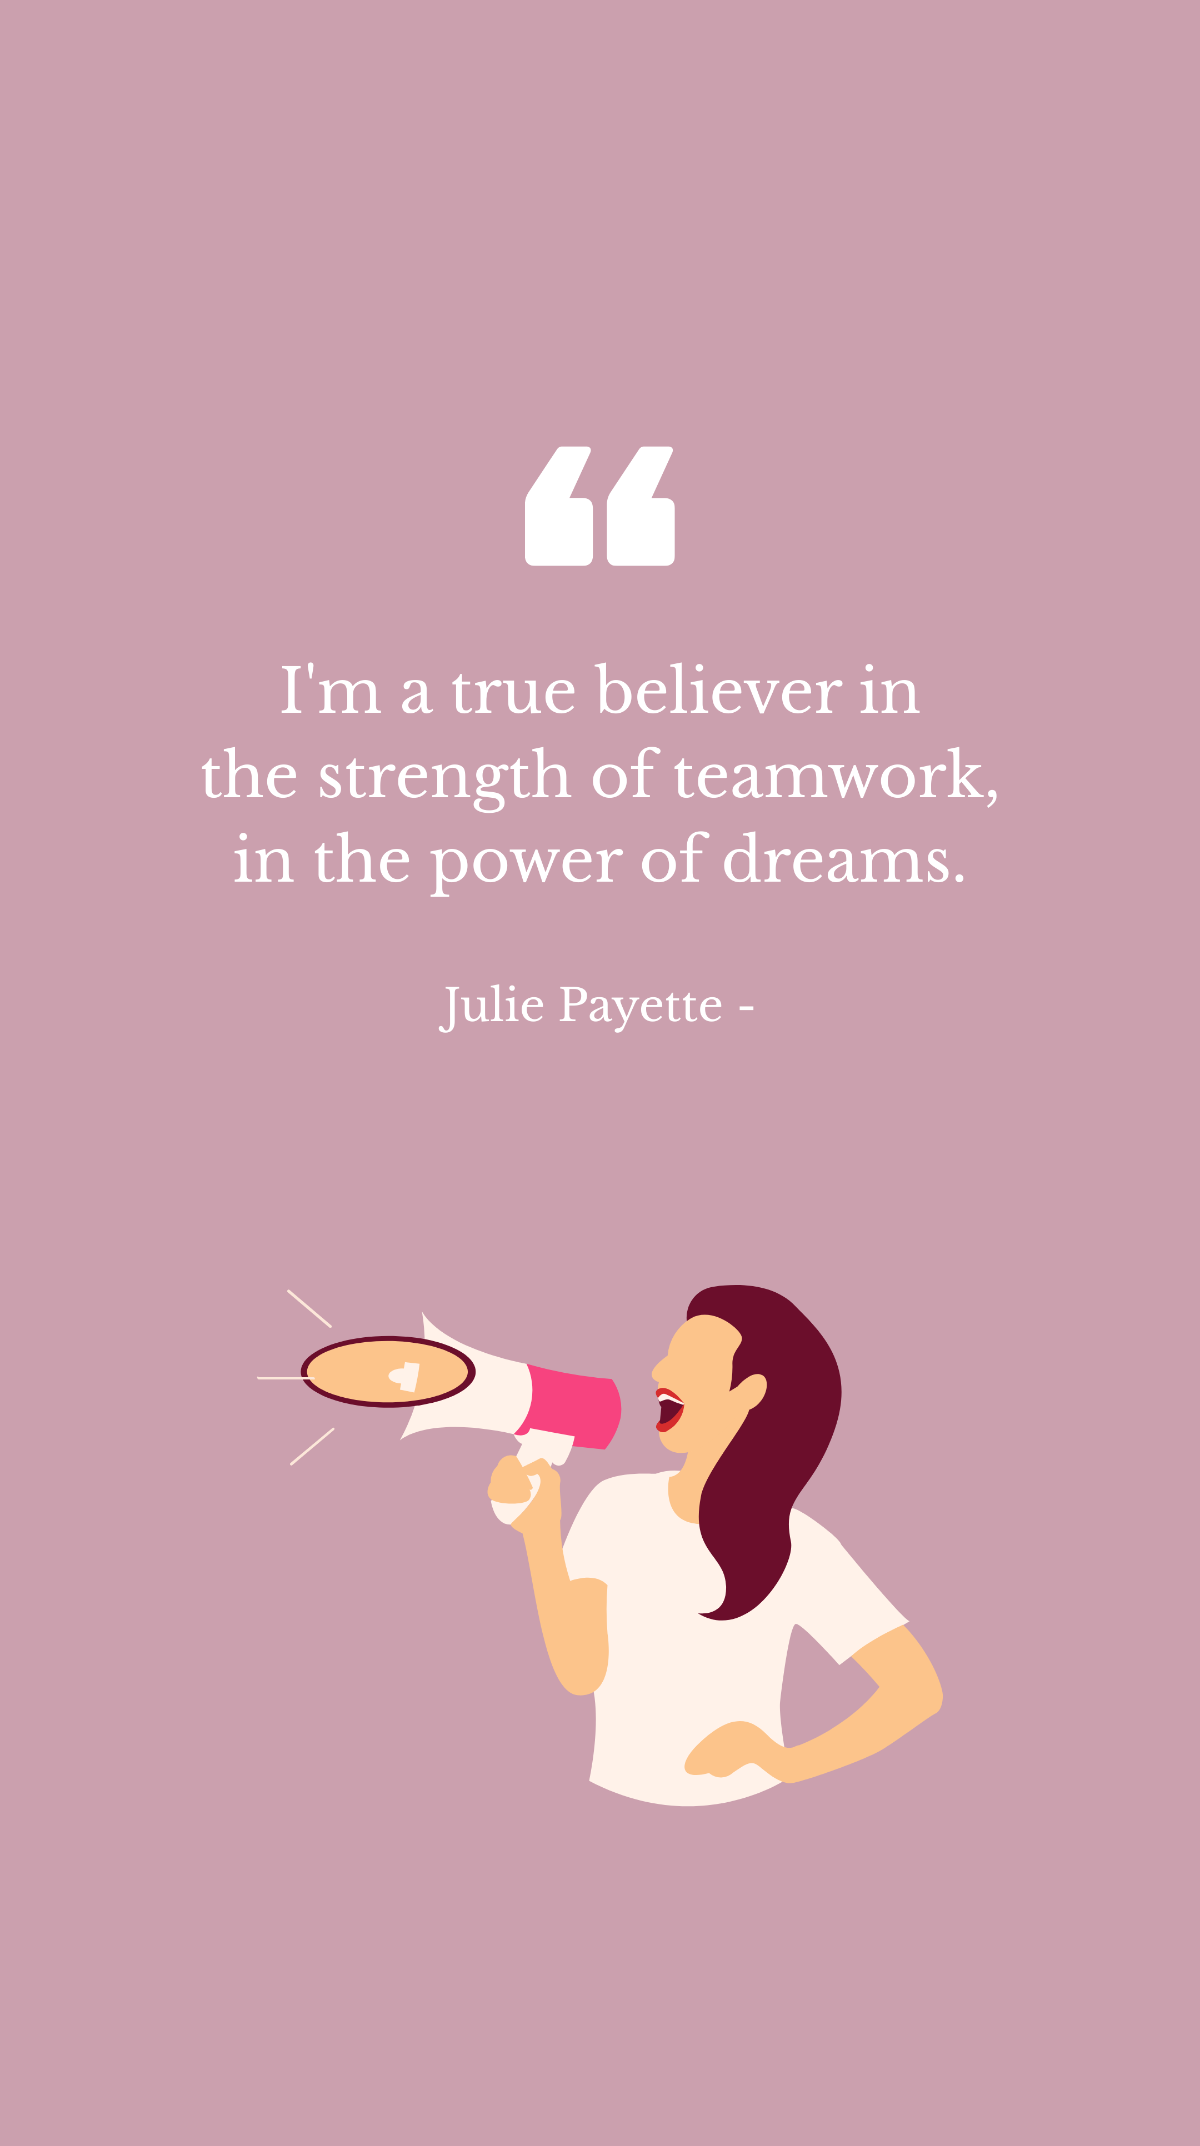 Free Julie Payette - I'm a true believer in the strength of teamwork, in the power of dreams. Template